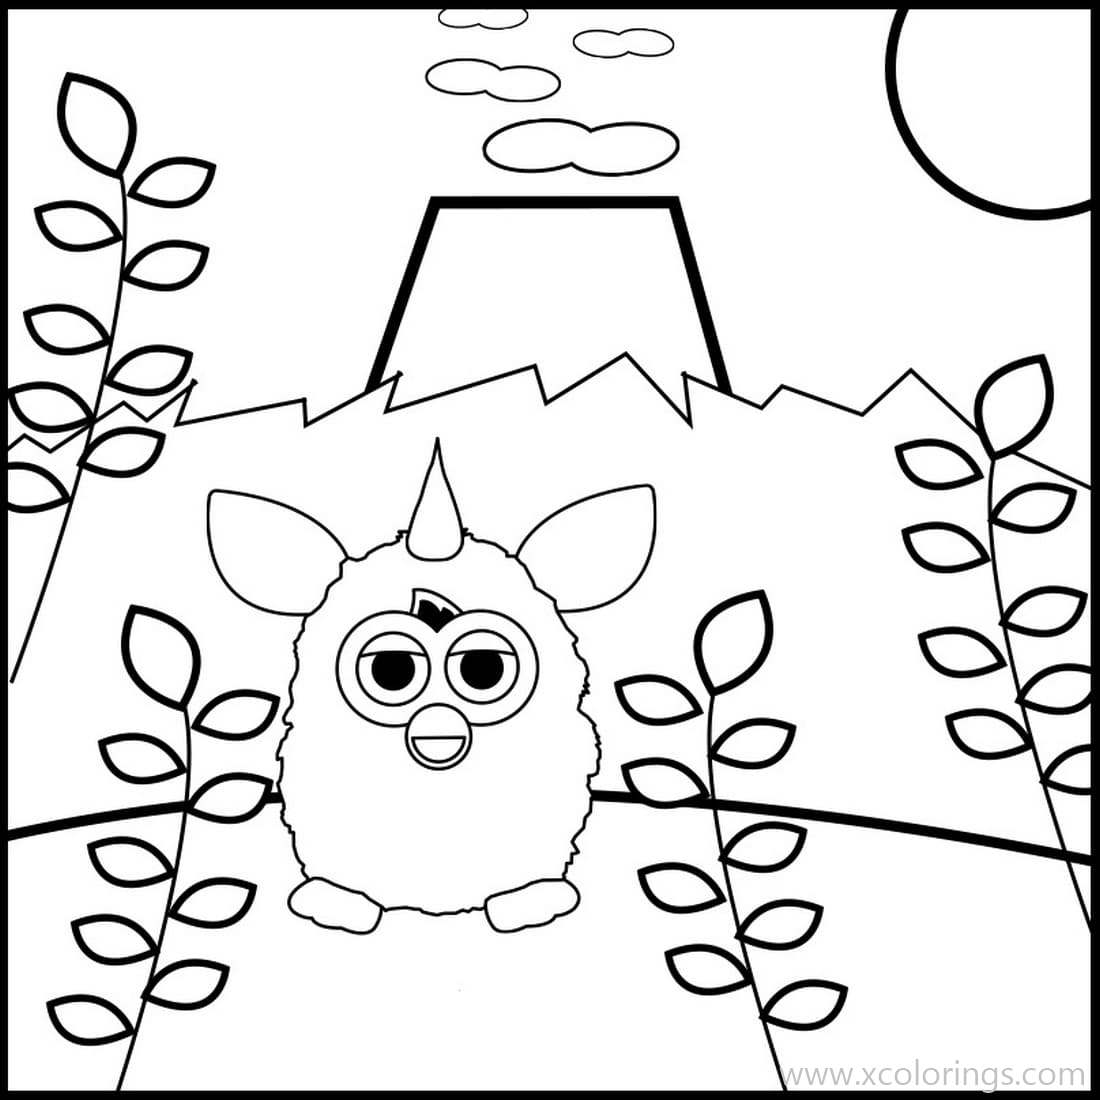 Furby Coloring Pages Volcano - XColorings.com